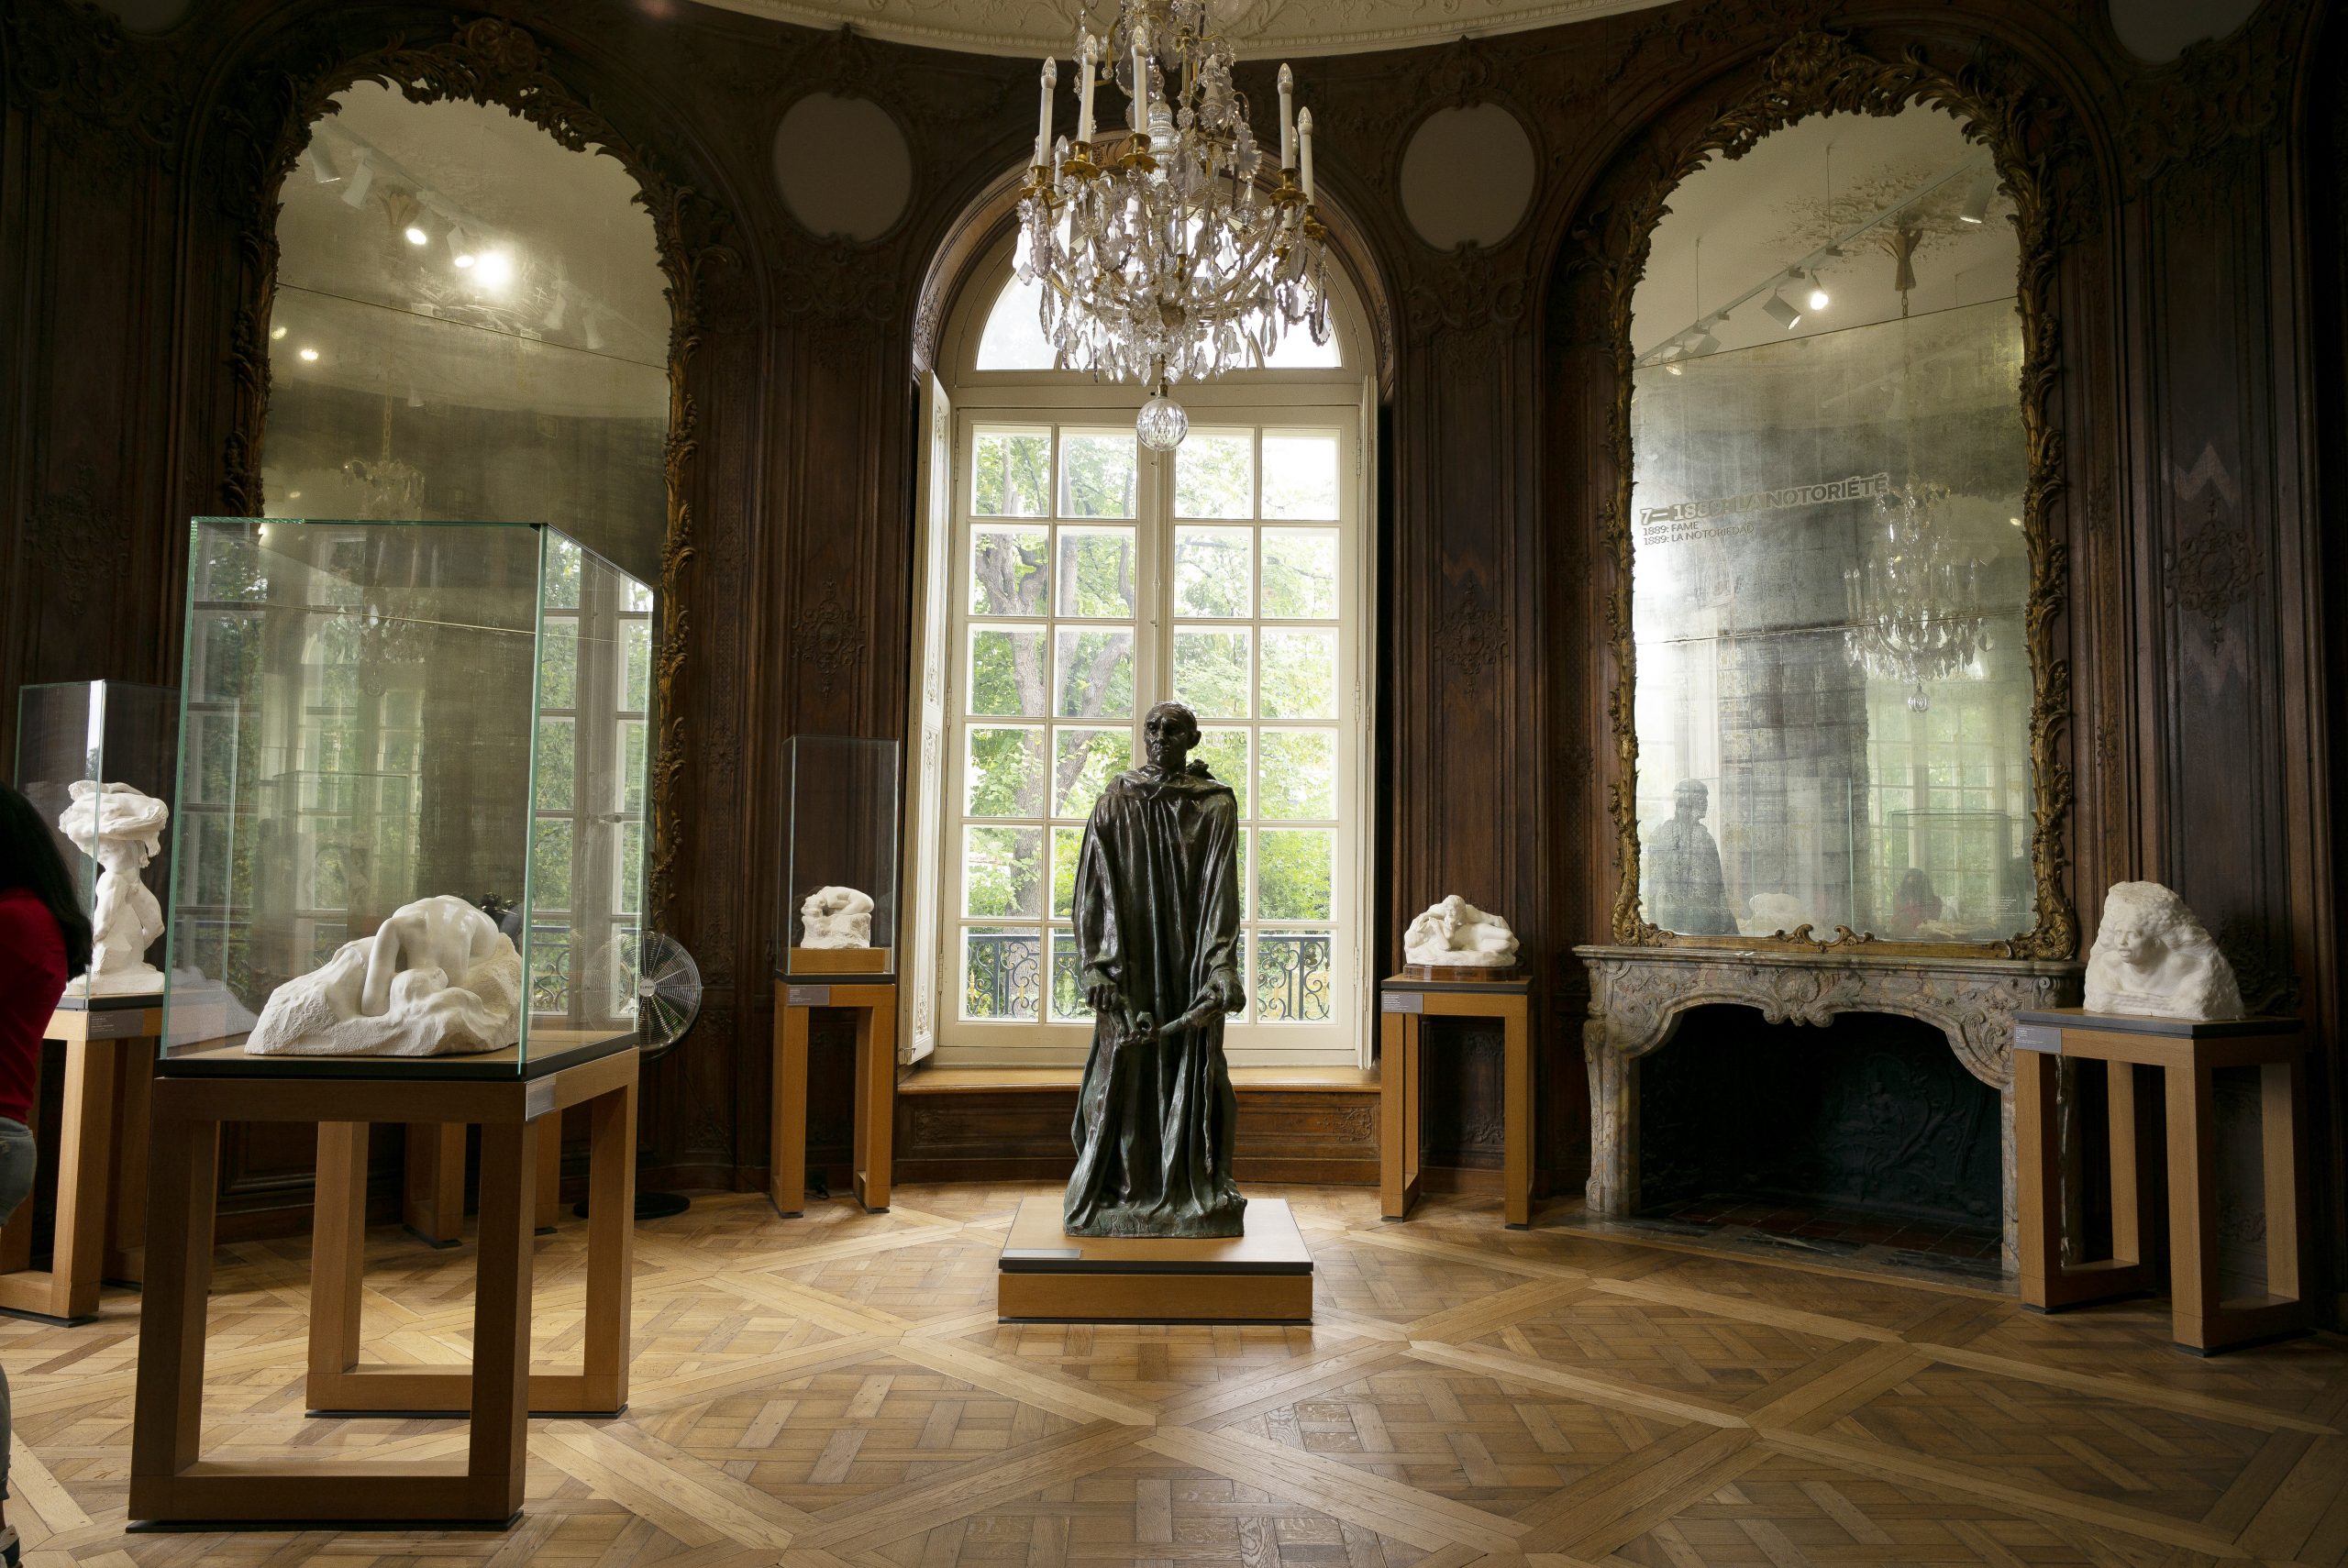 Art Bites: The Rodin Museum Was Once a Thriving Artist Commune